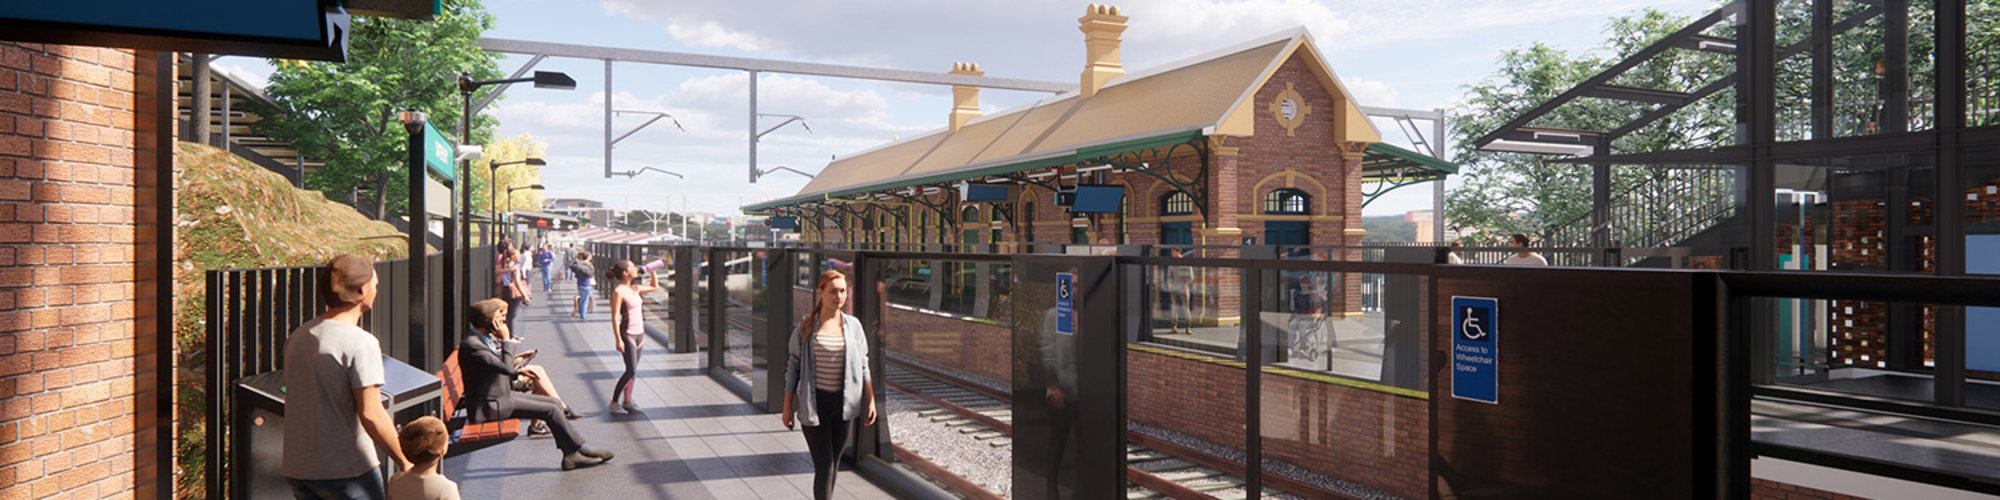 An artist's impression of the future metro station at Canterbury as viewed from the platform, being delivered as part of the Sydney Metro City & Southwest project.